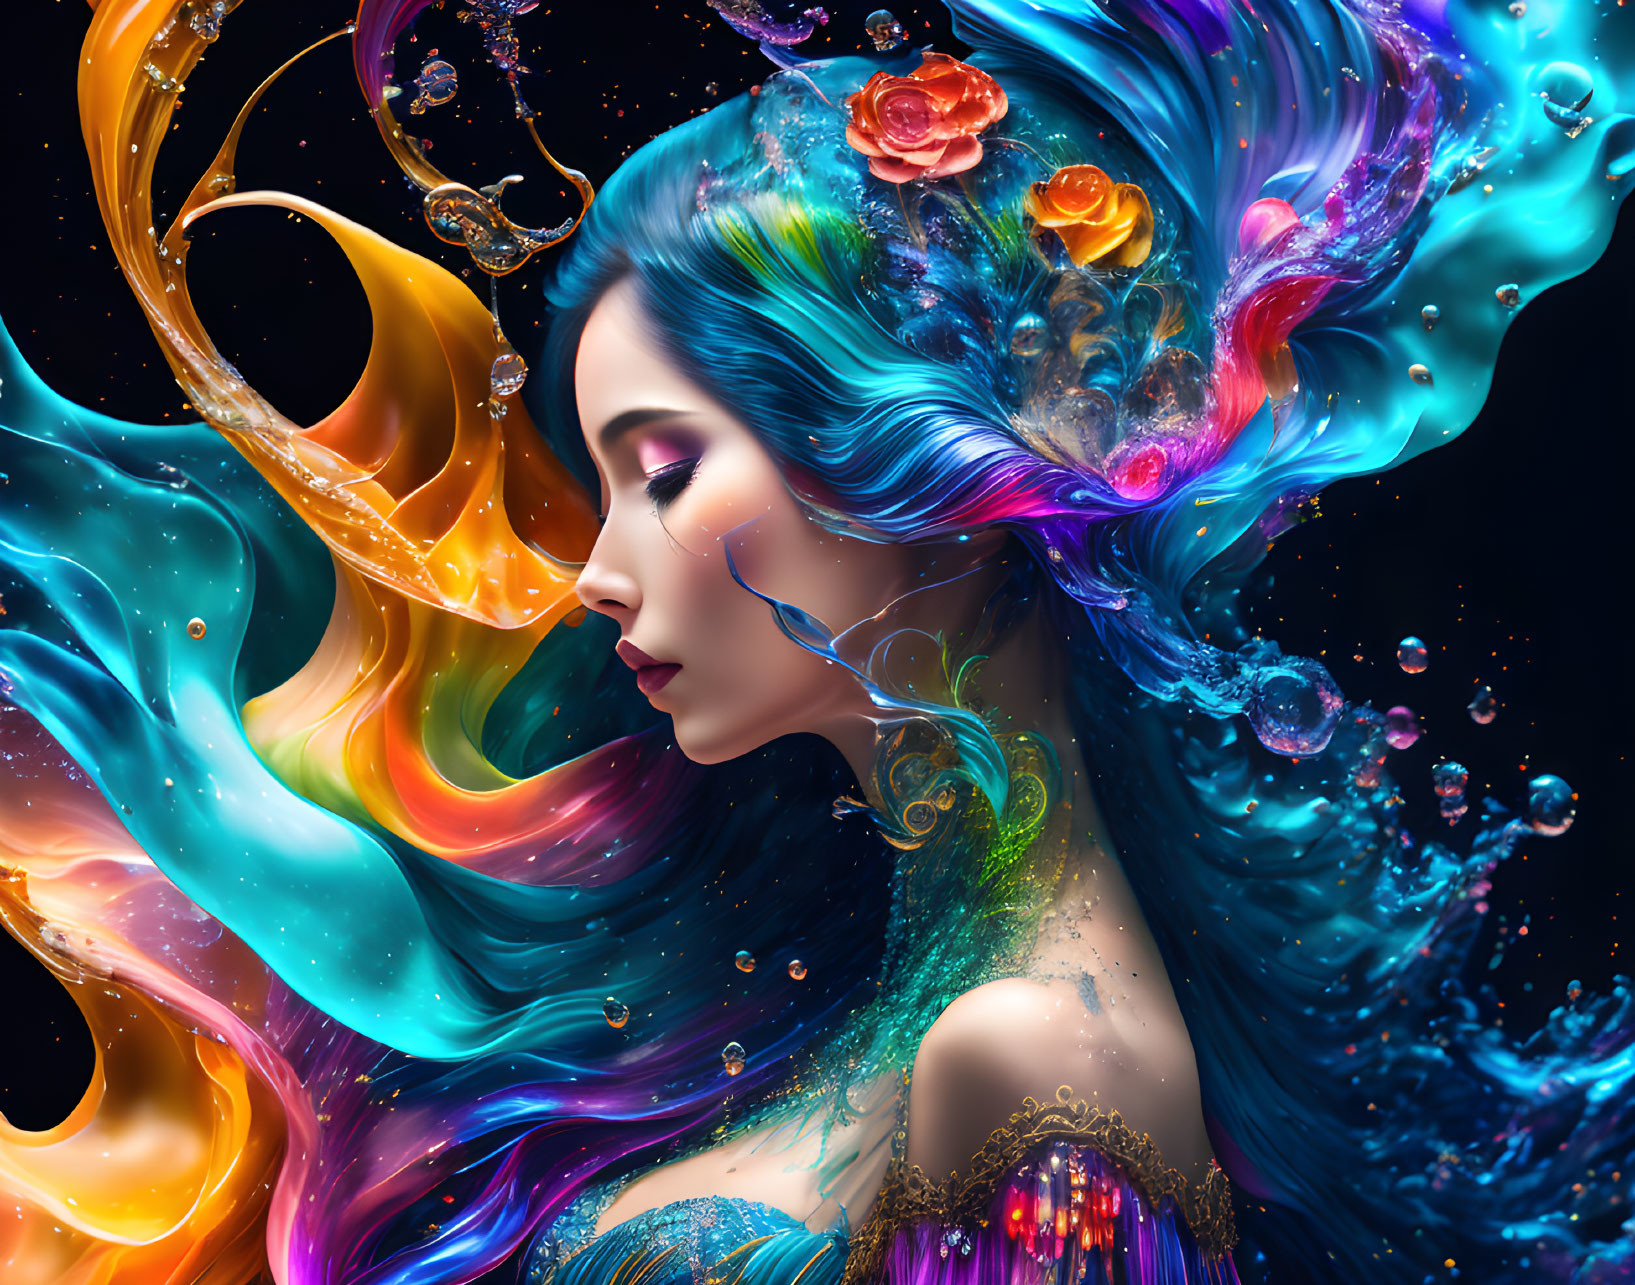 Colorful Woman with Flowing Hair on Dark Background